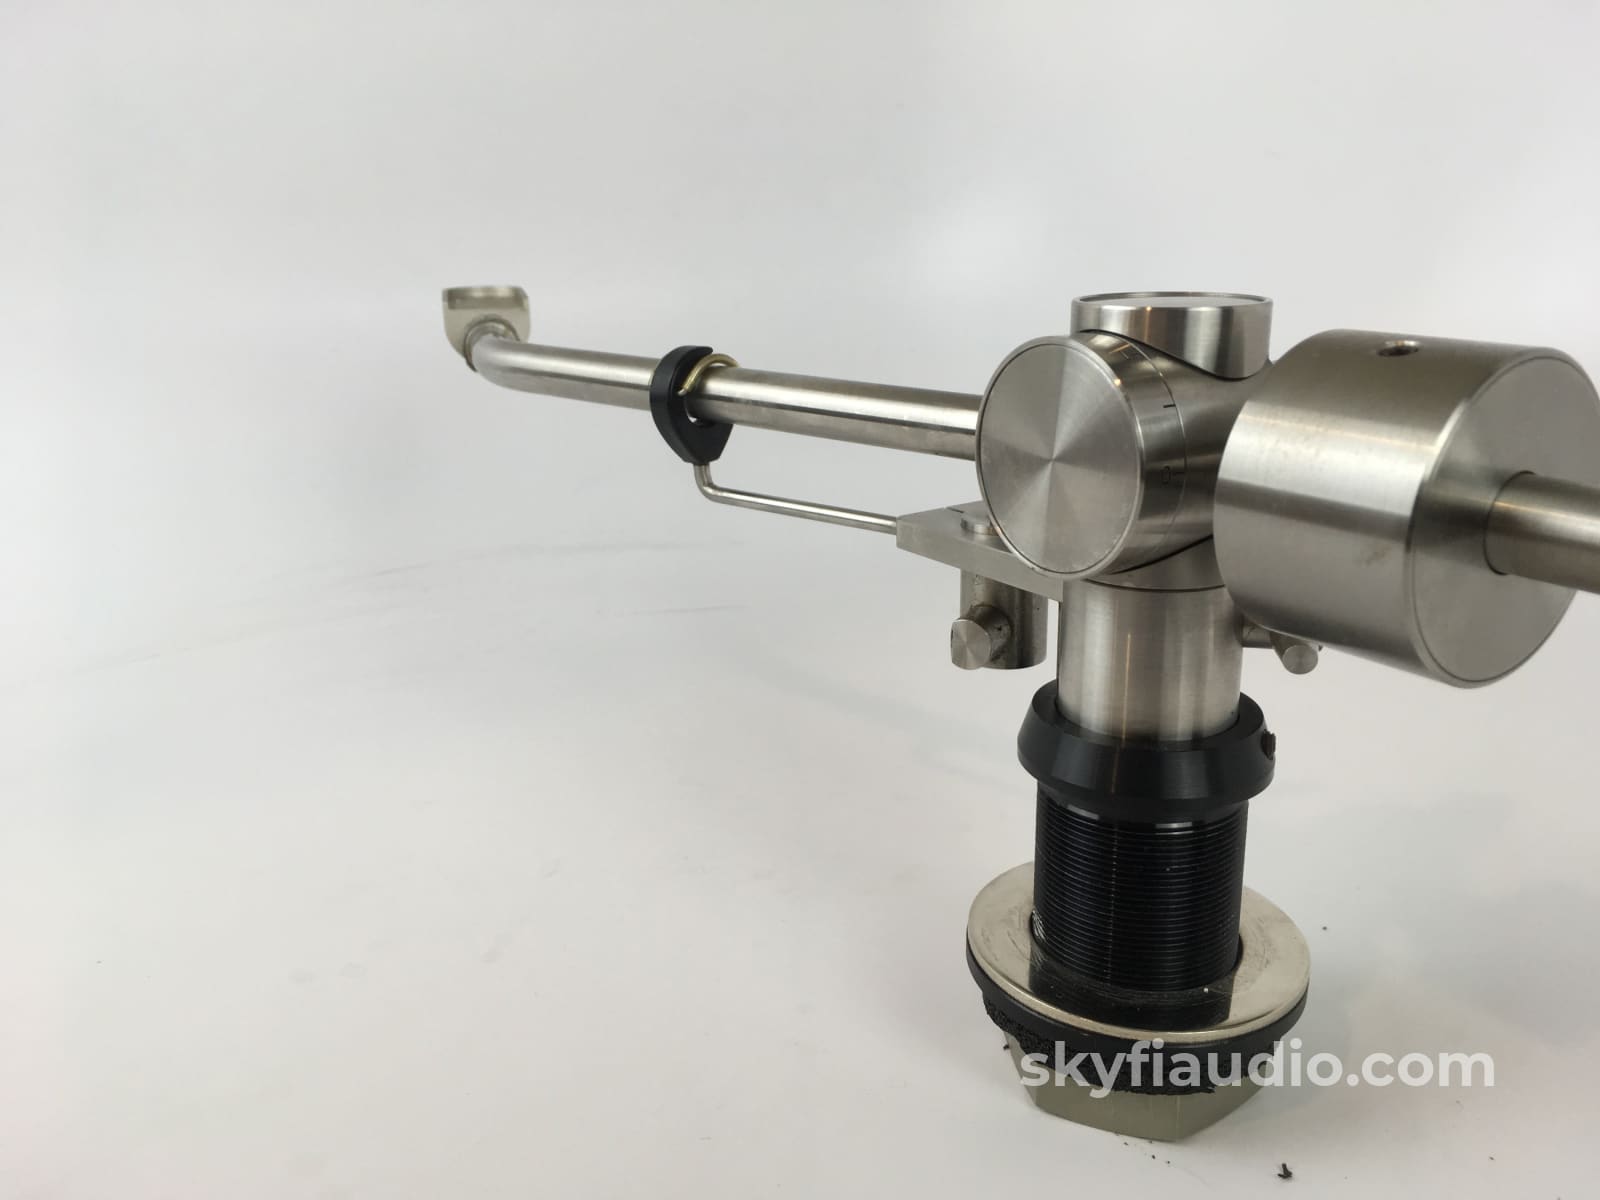 Fidelity Research FR-64S Tonearm - Vintage NOS (New Old Stock) - Rare